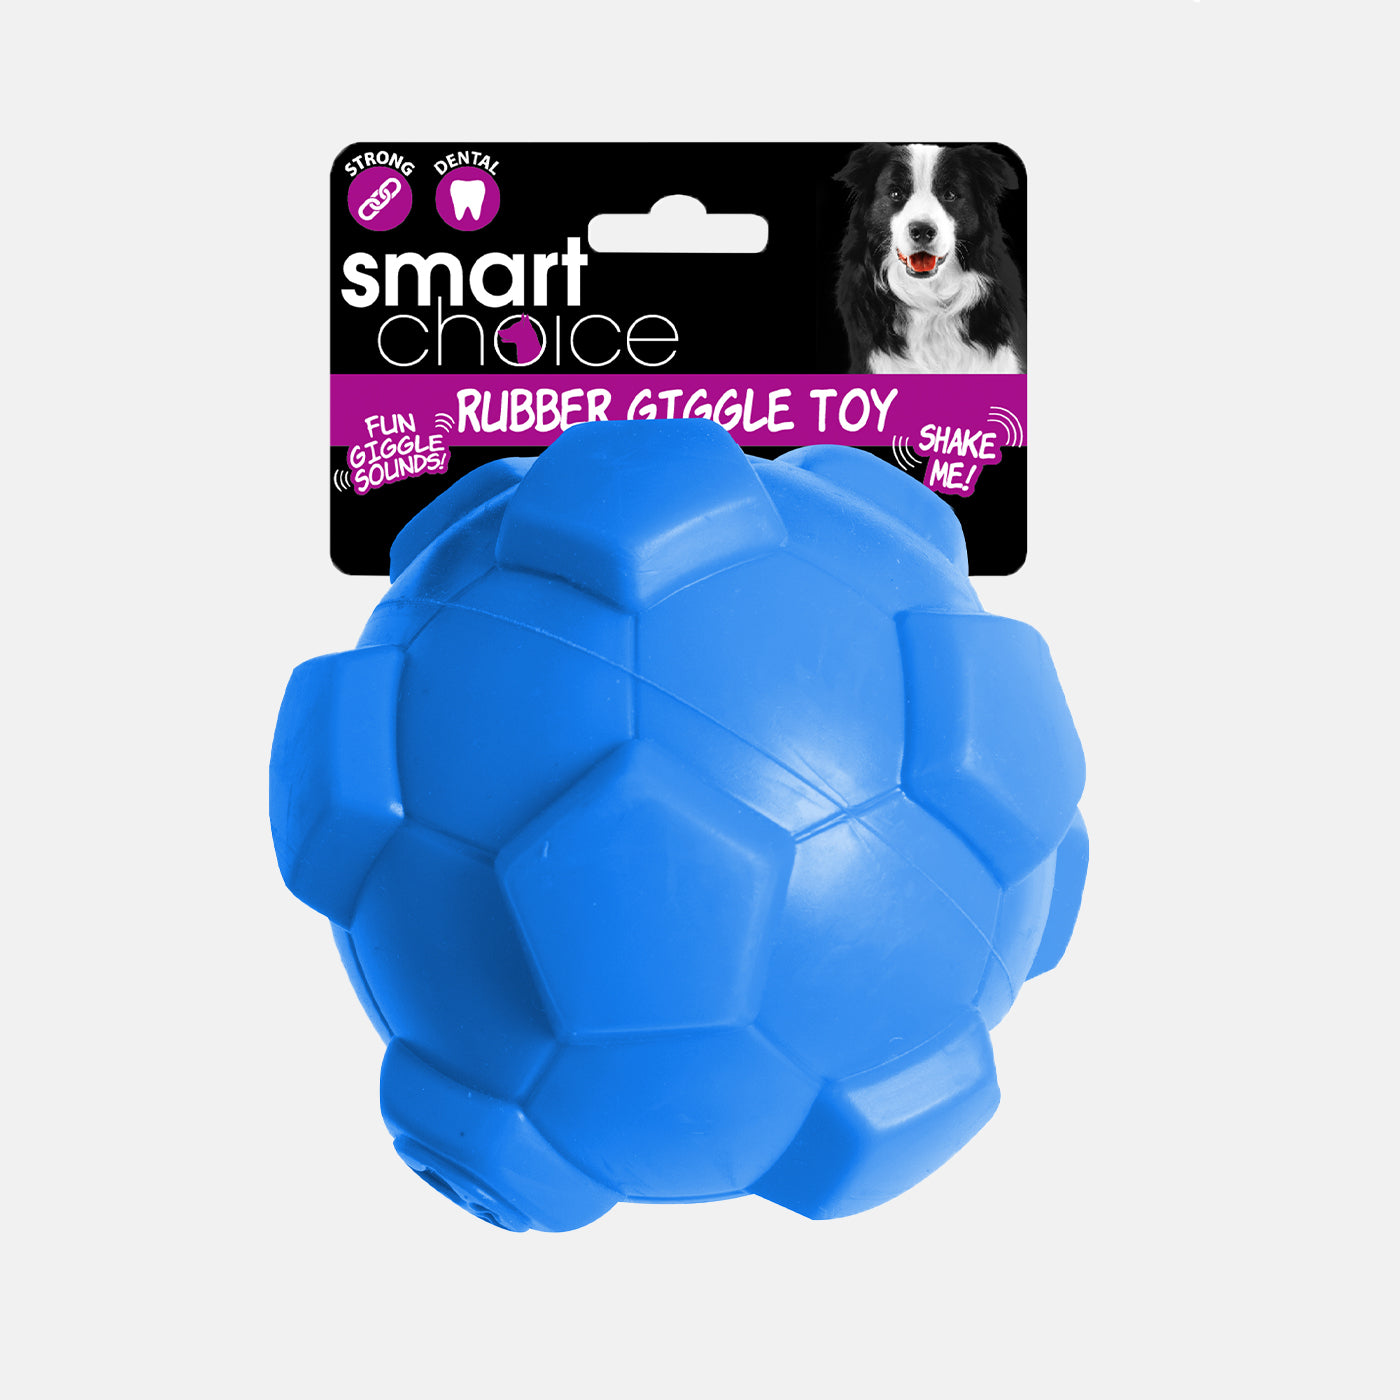 Rubber Dog Toy With Giggle Noise